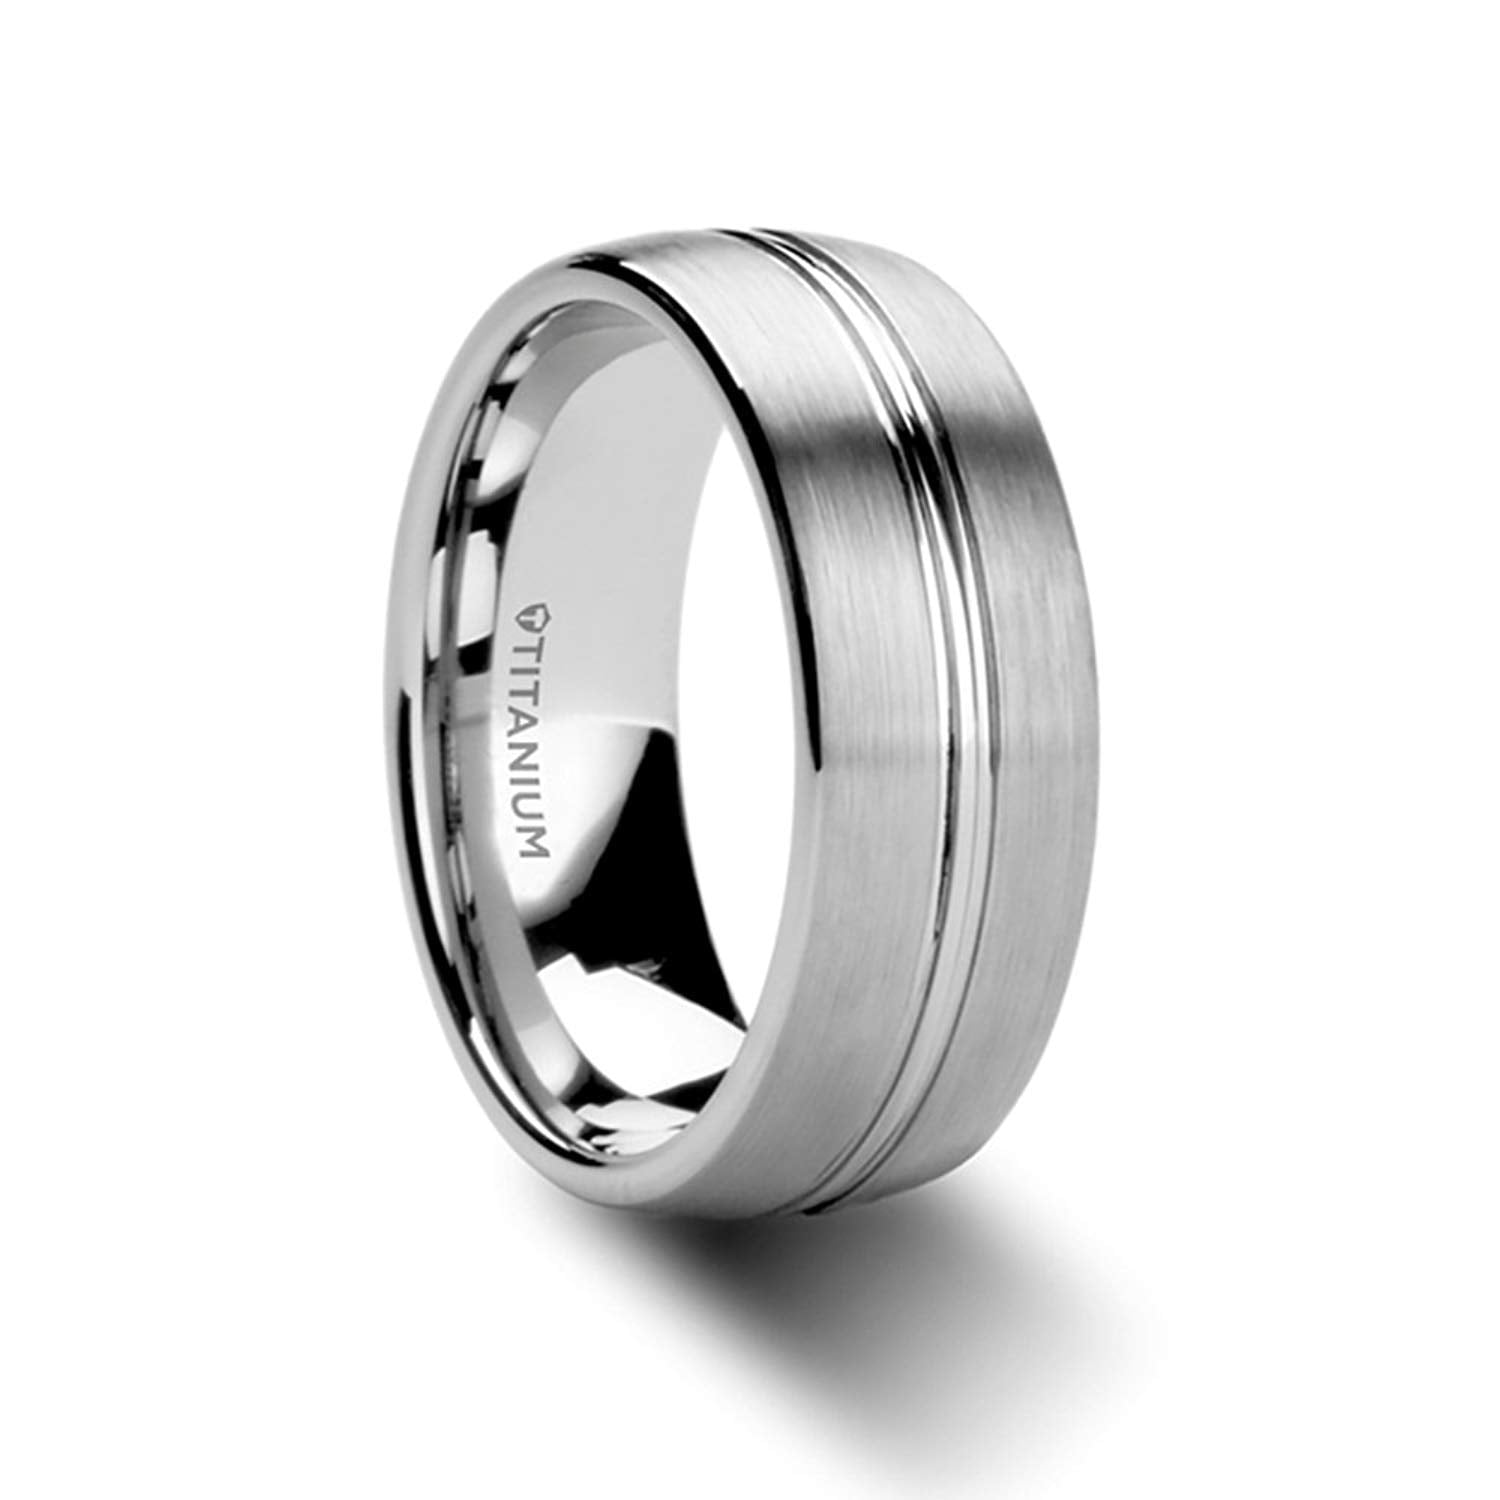 Mens Rings Fashion Rings Stainless Steel Satin and Polished with Silver Center Inlay Ring Size 8 